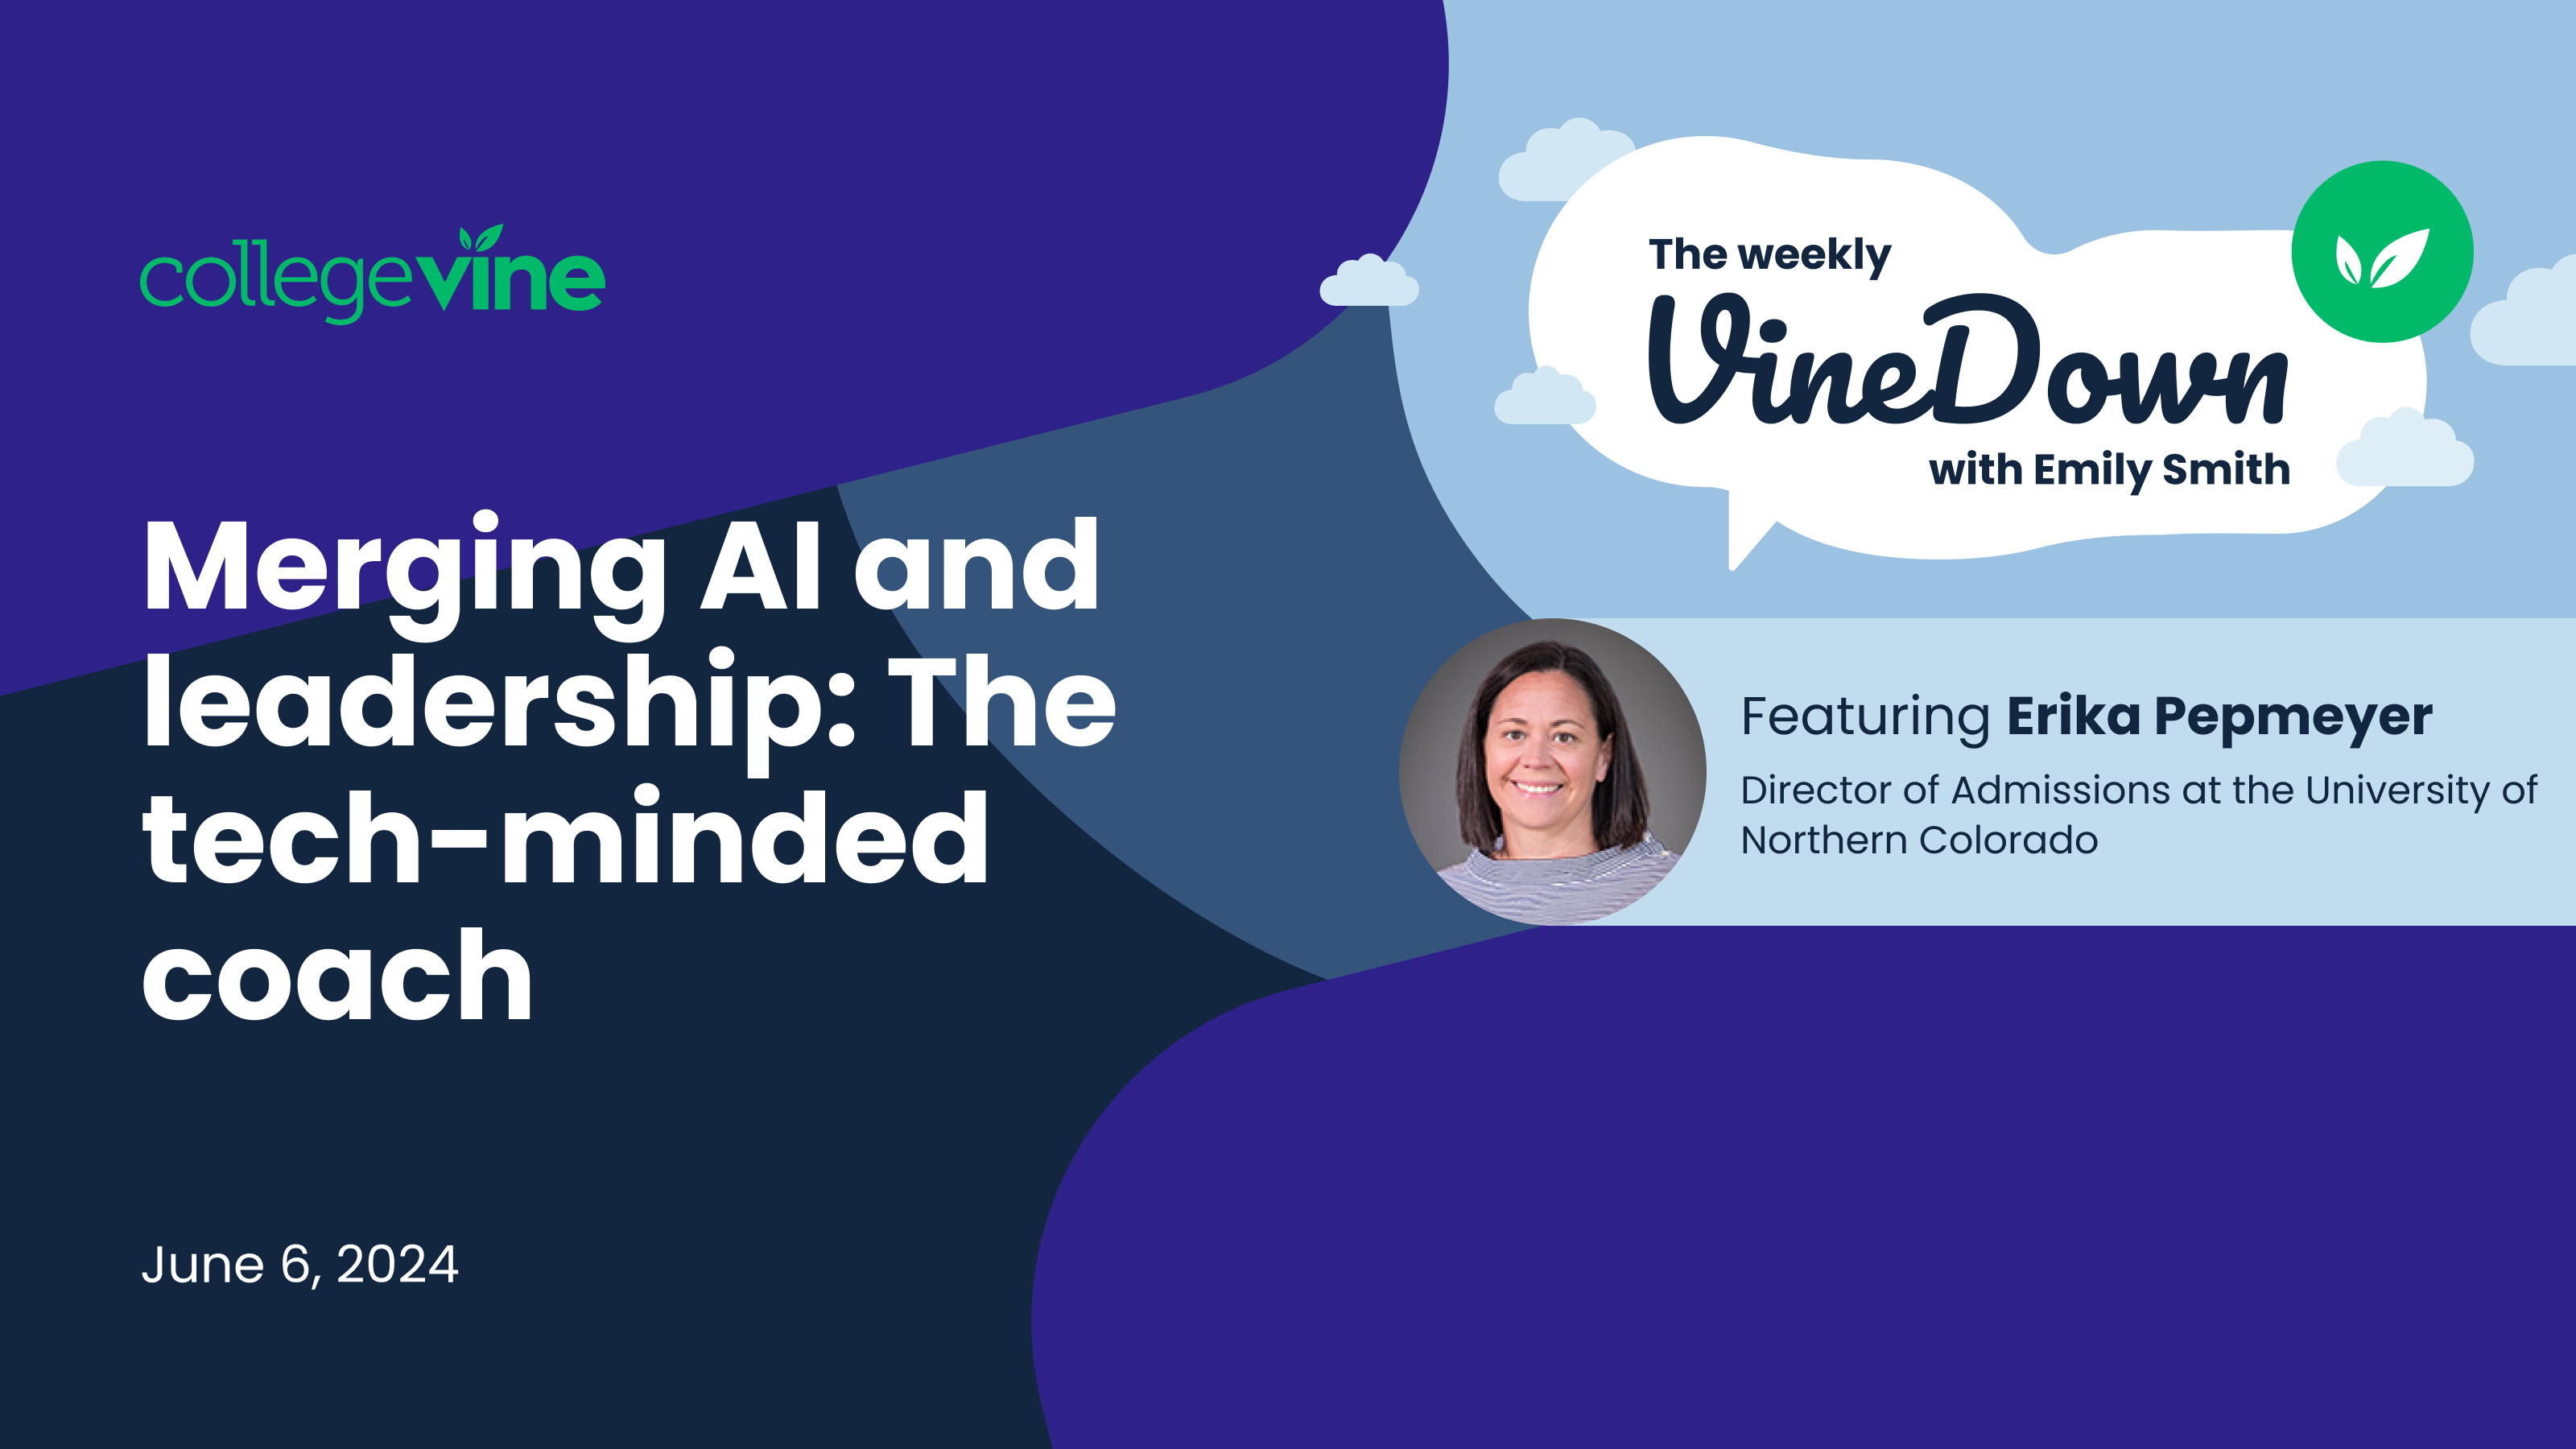 The Weekly VineDown: Merging AI and leadership: The tech-minded coach